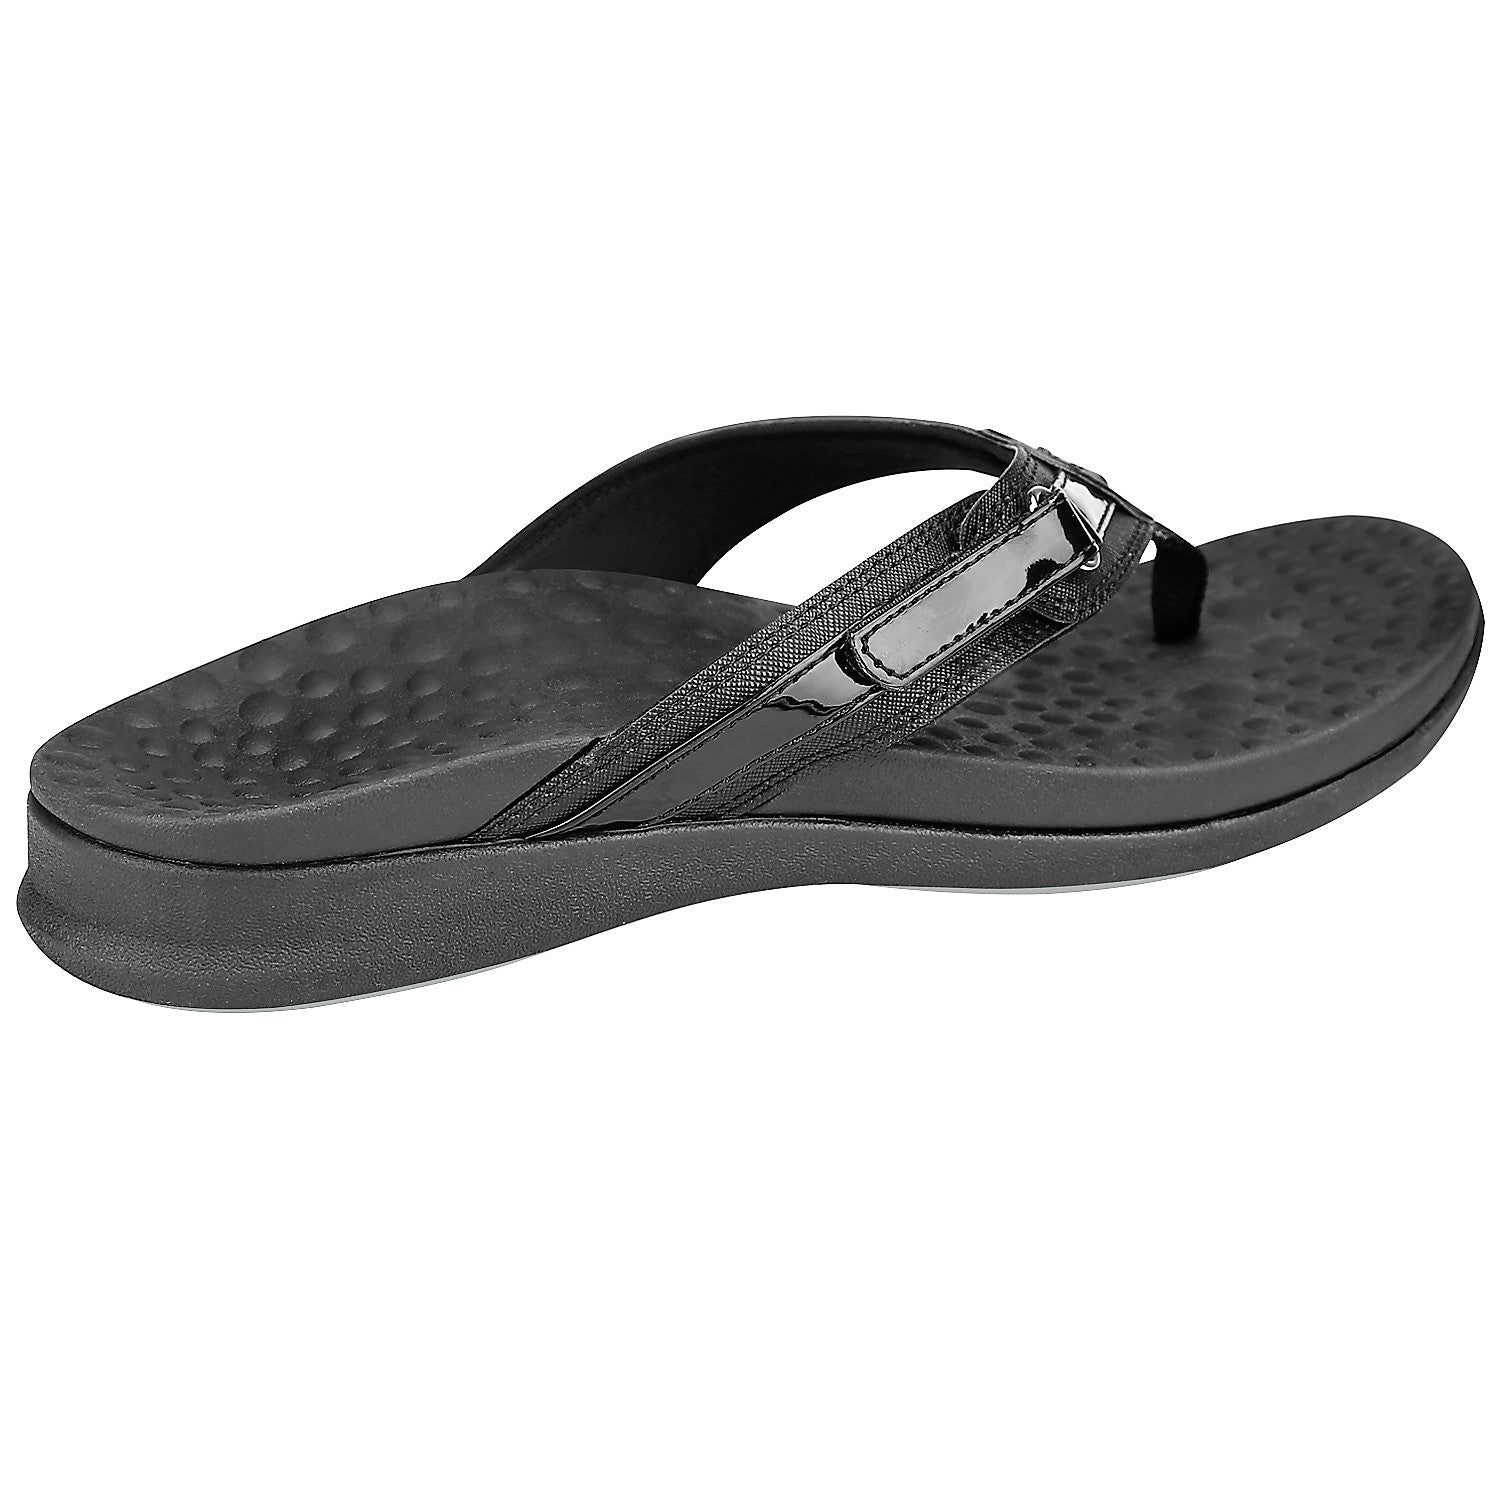 Footminders SEYMOUR Women's Orthotic Sandals